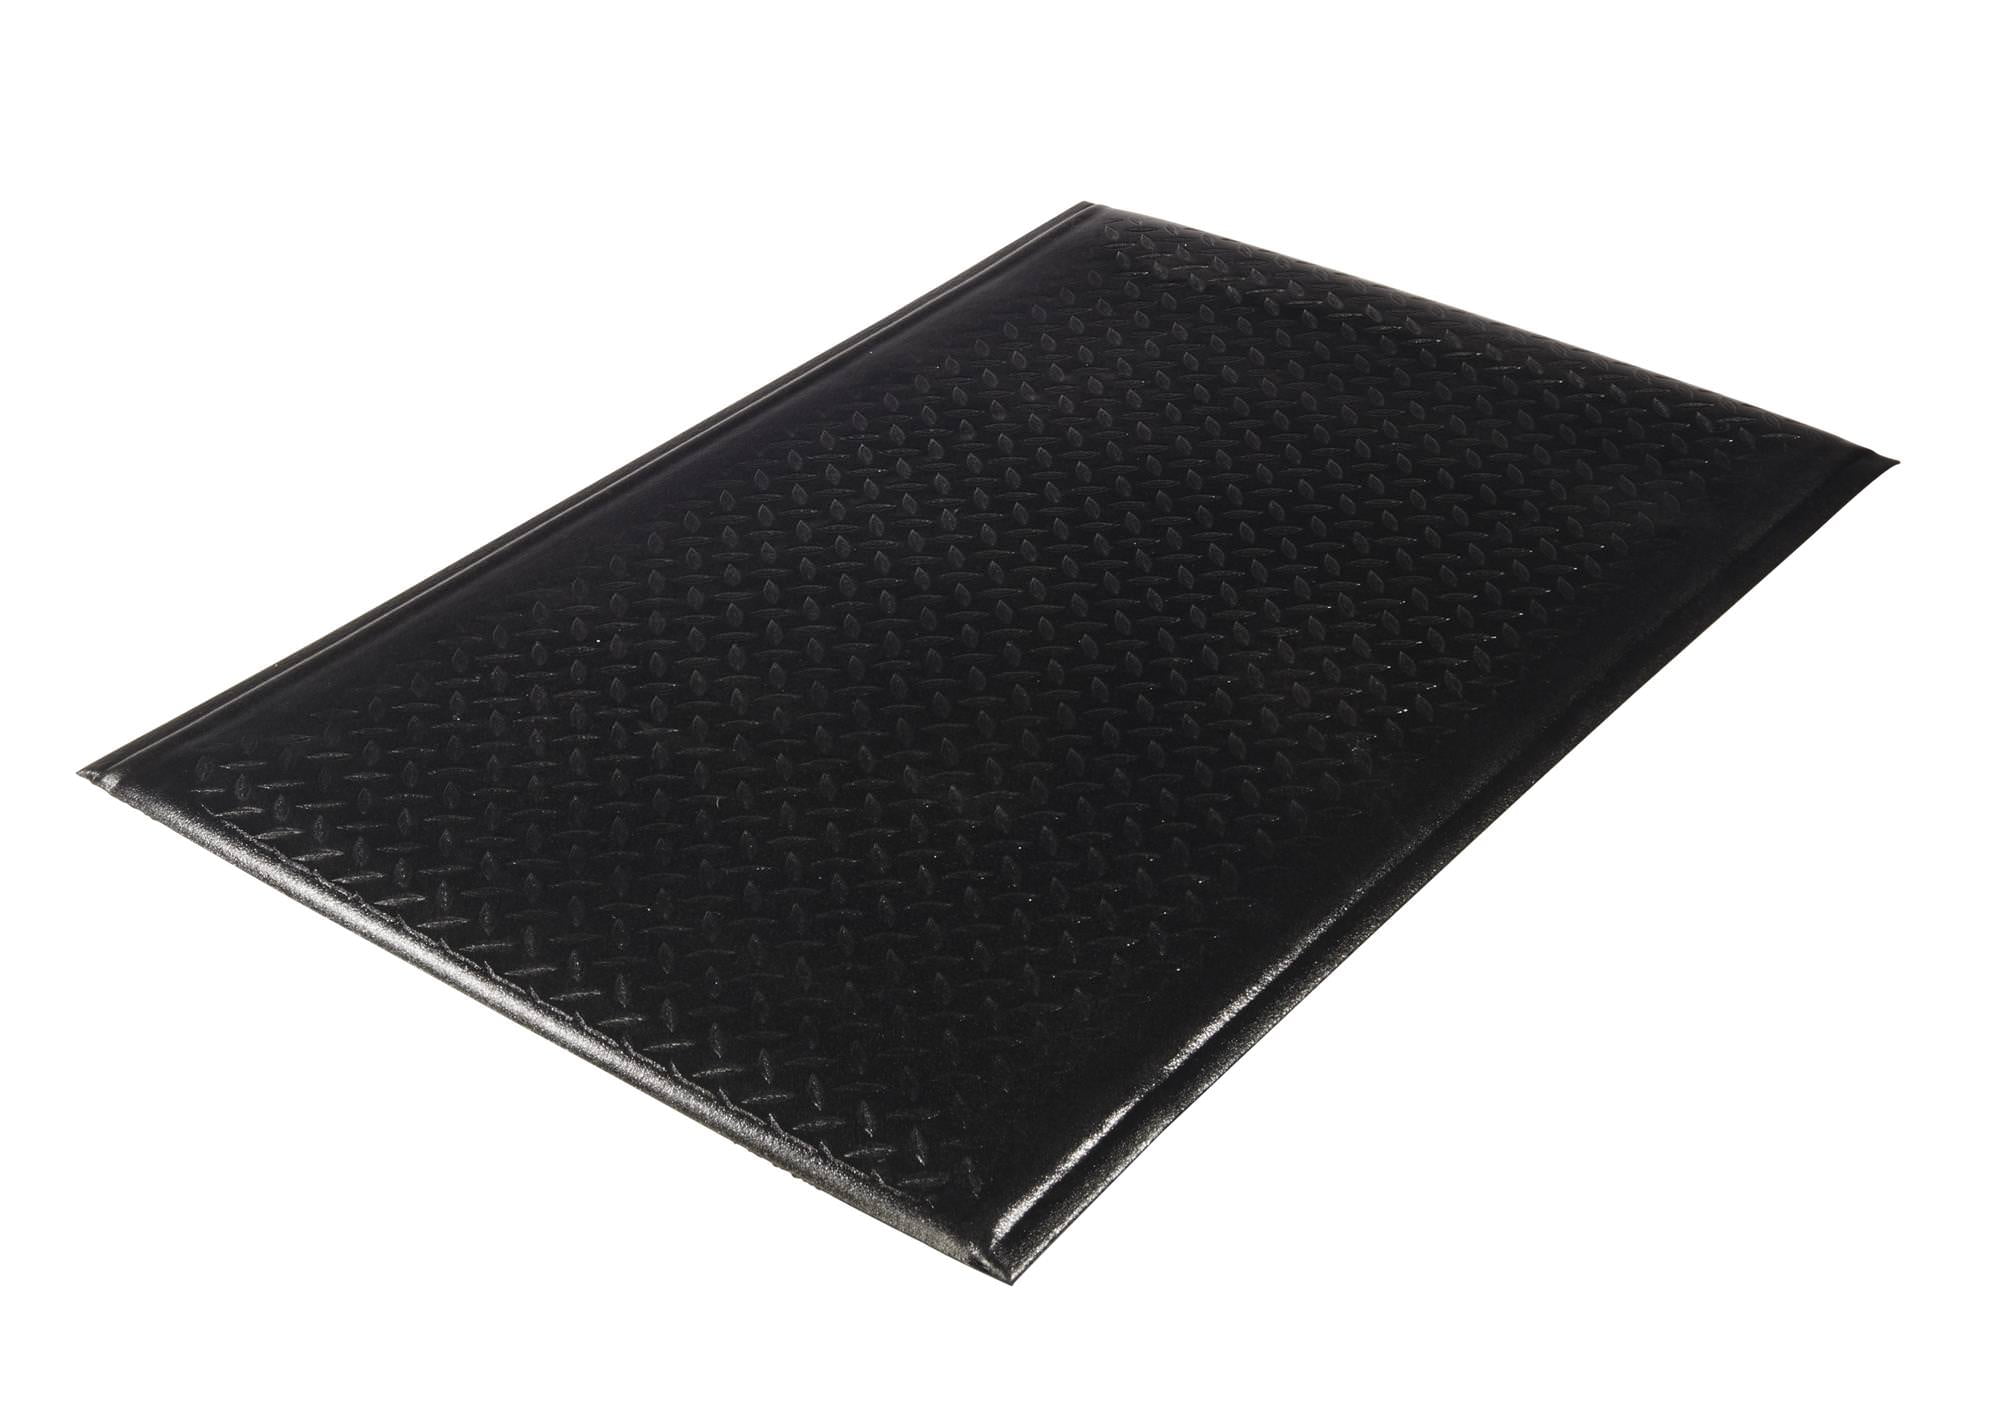 Reduces fatigue and discomfort 2x60 Guardian Air Step  Anti-Fatigue Floor Mat Black Vinyl Can be easily cut to fit any space 